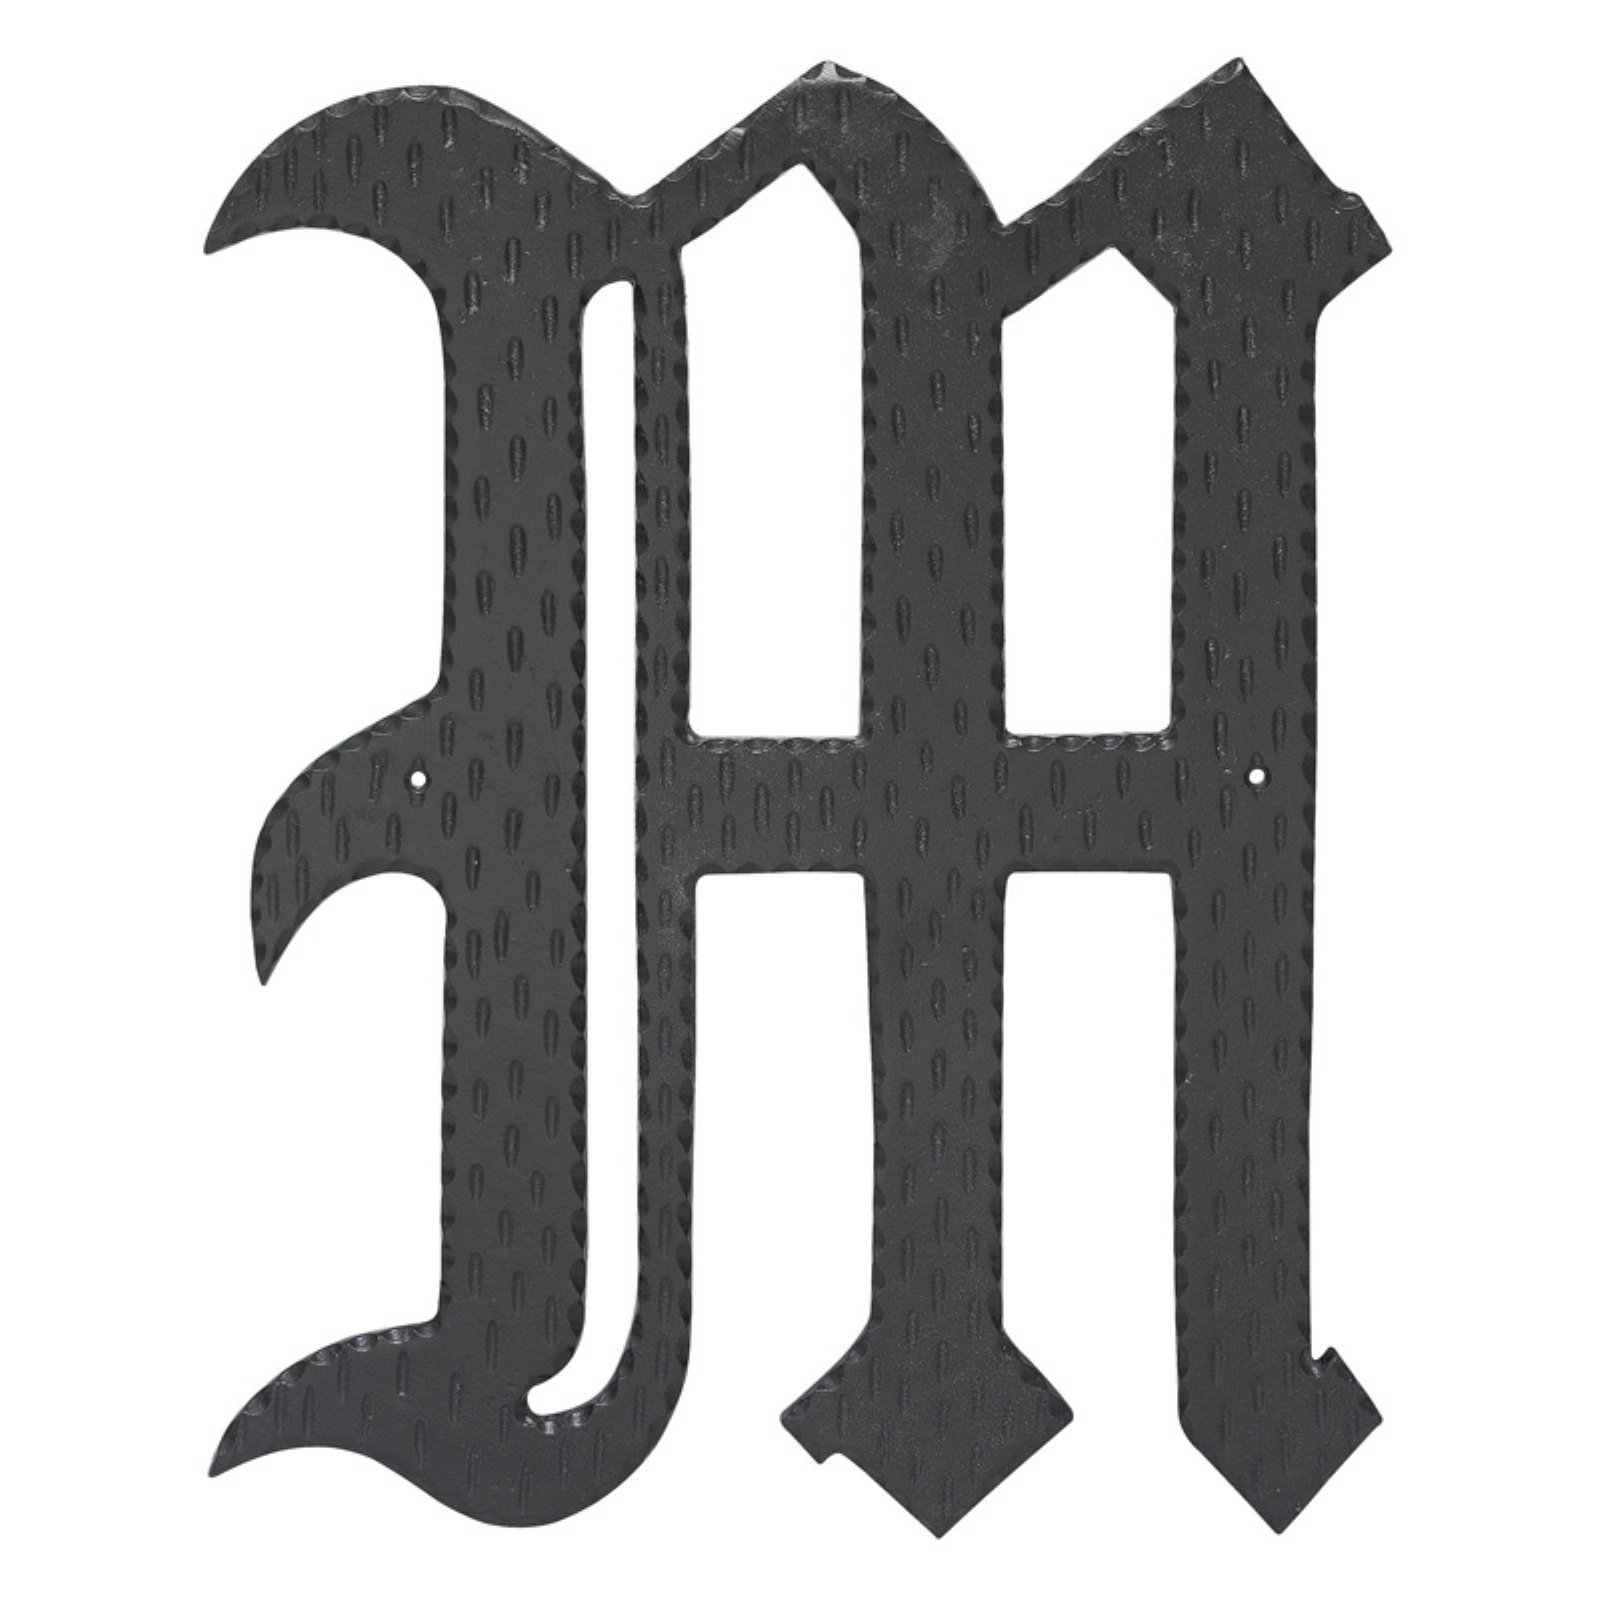 Montague Metal 16 in. Home Accent Monogram - Black - image 1 of 2